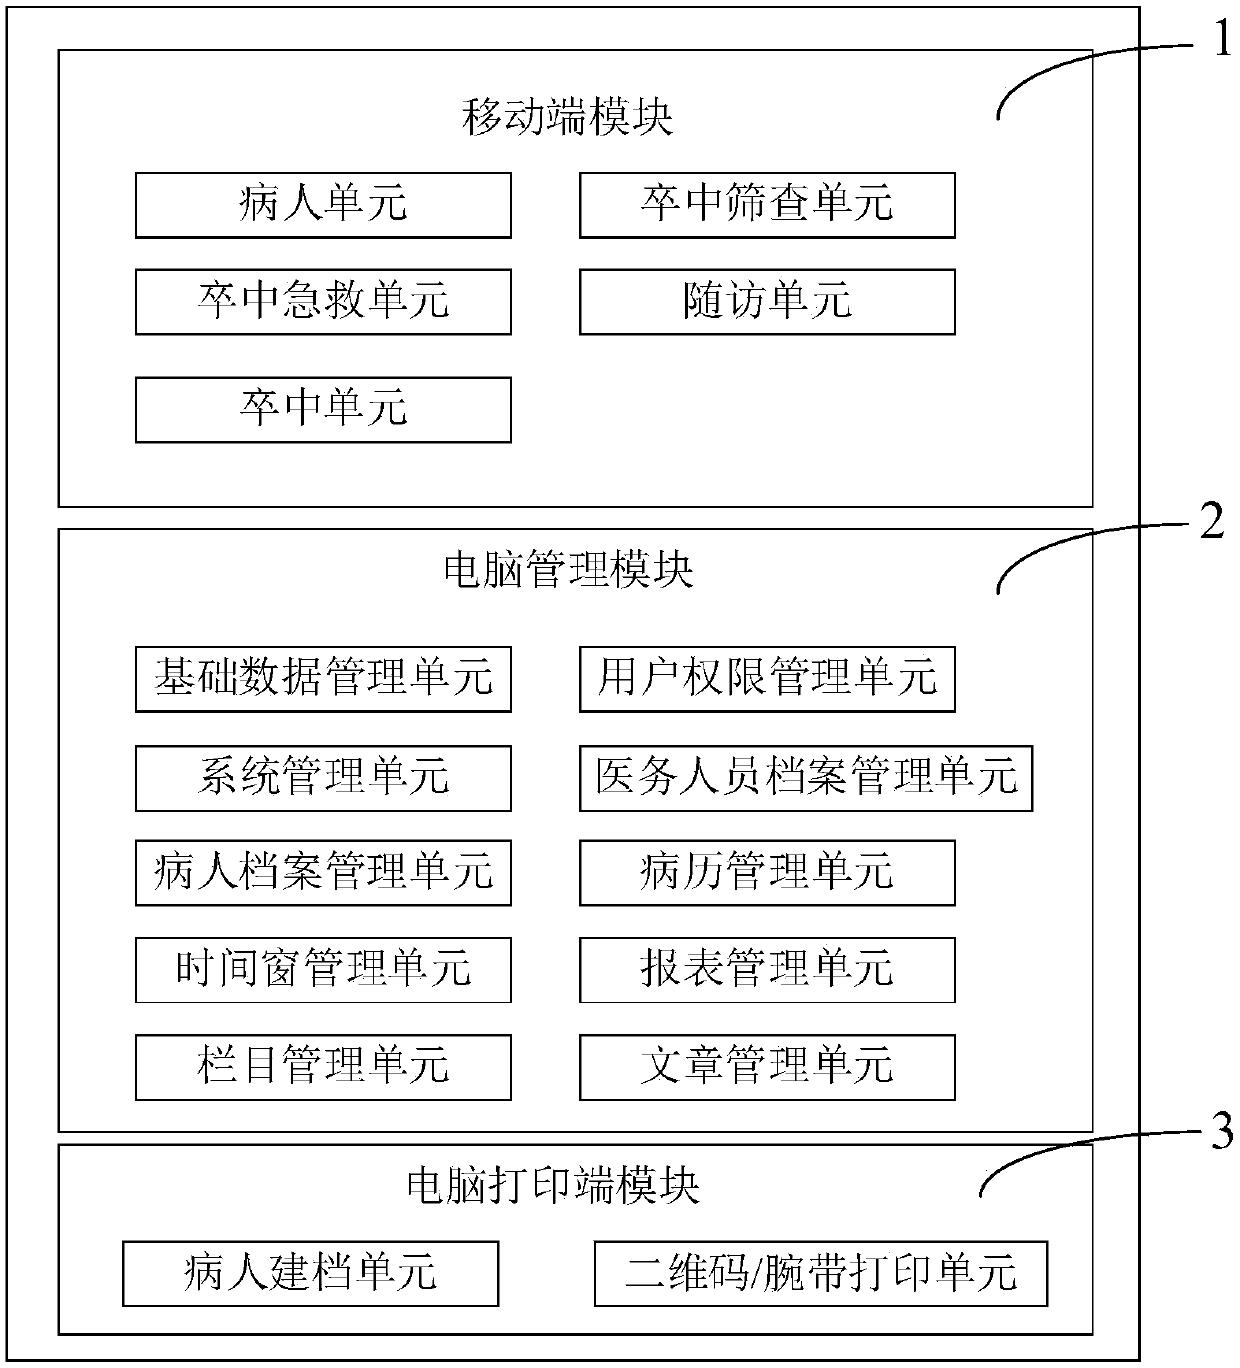 Cerebral apoplexy data management system and cerebral apoplexy data management method based on mobile internet